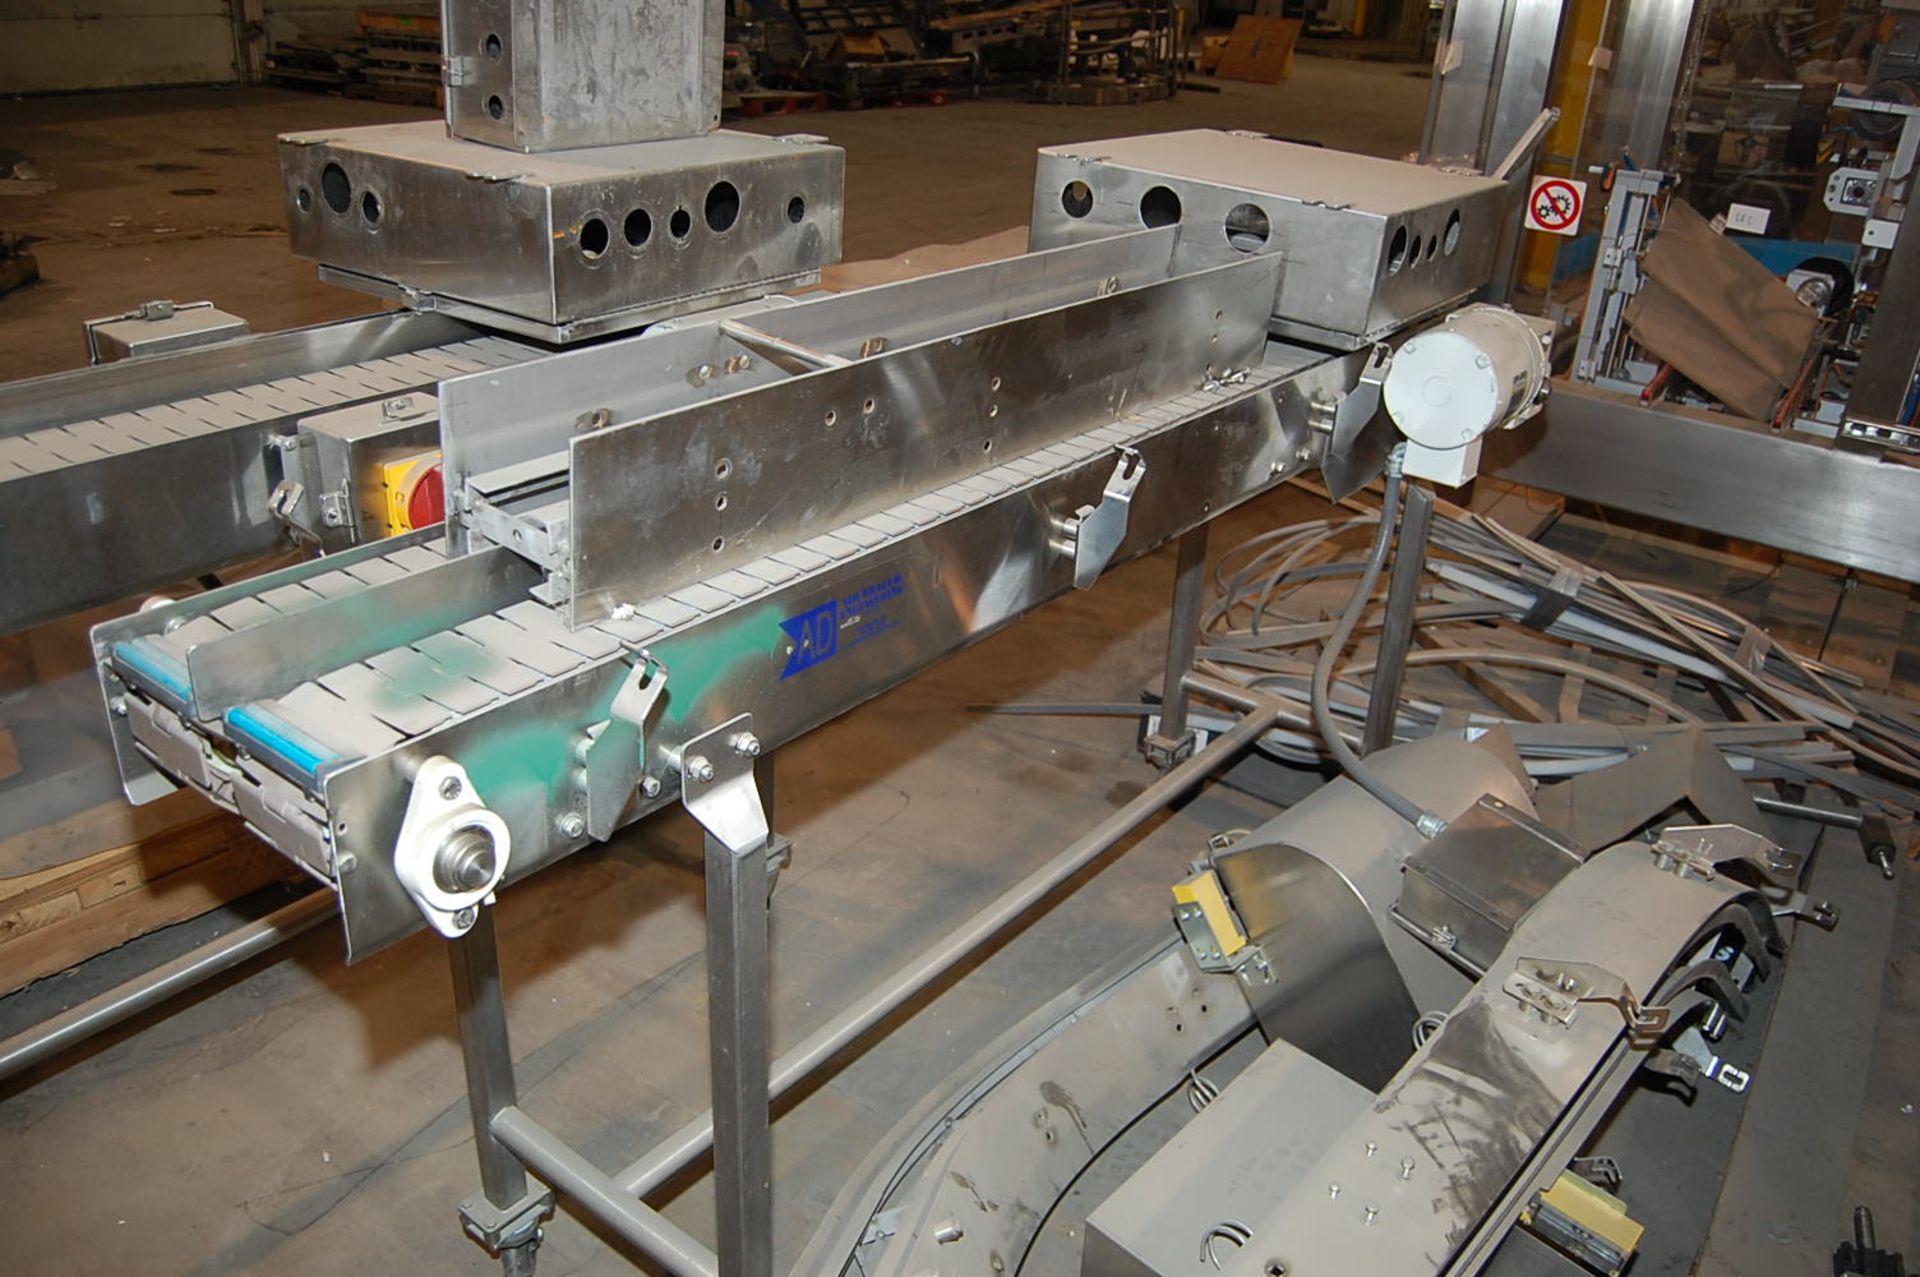 ADE Conveyor System, Two Line Design, (2) Fractional HP Motors and Control, 4-Wheel Drive Rigging